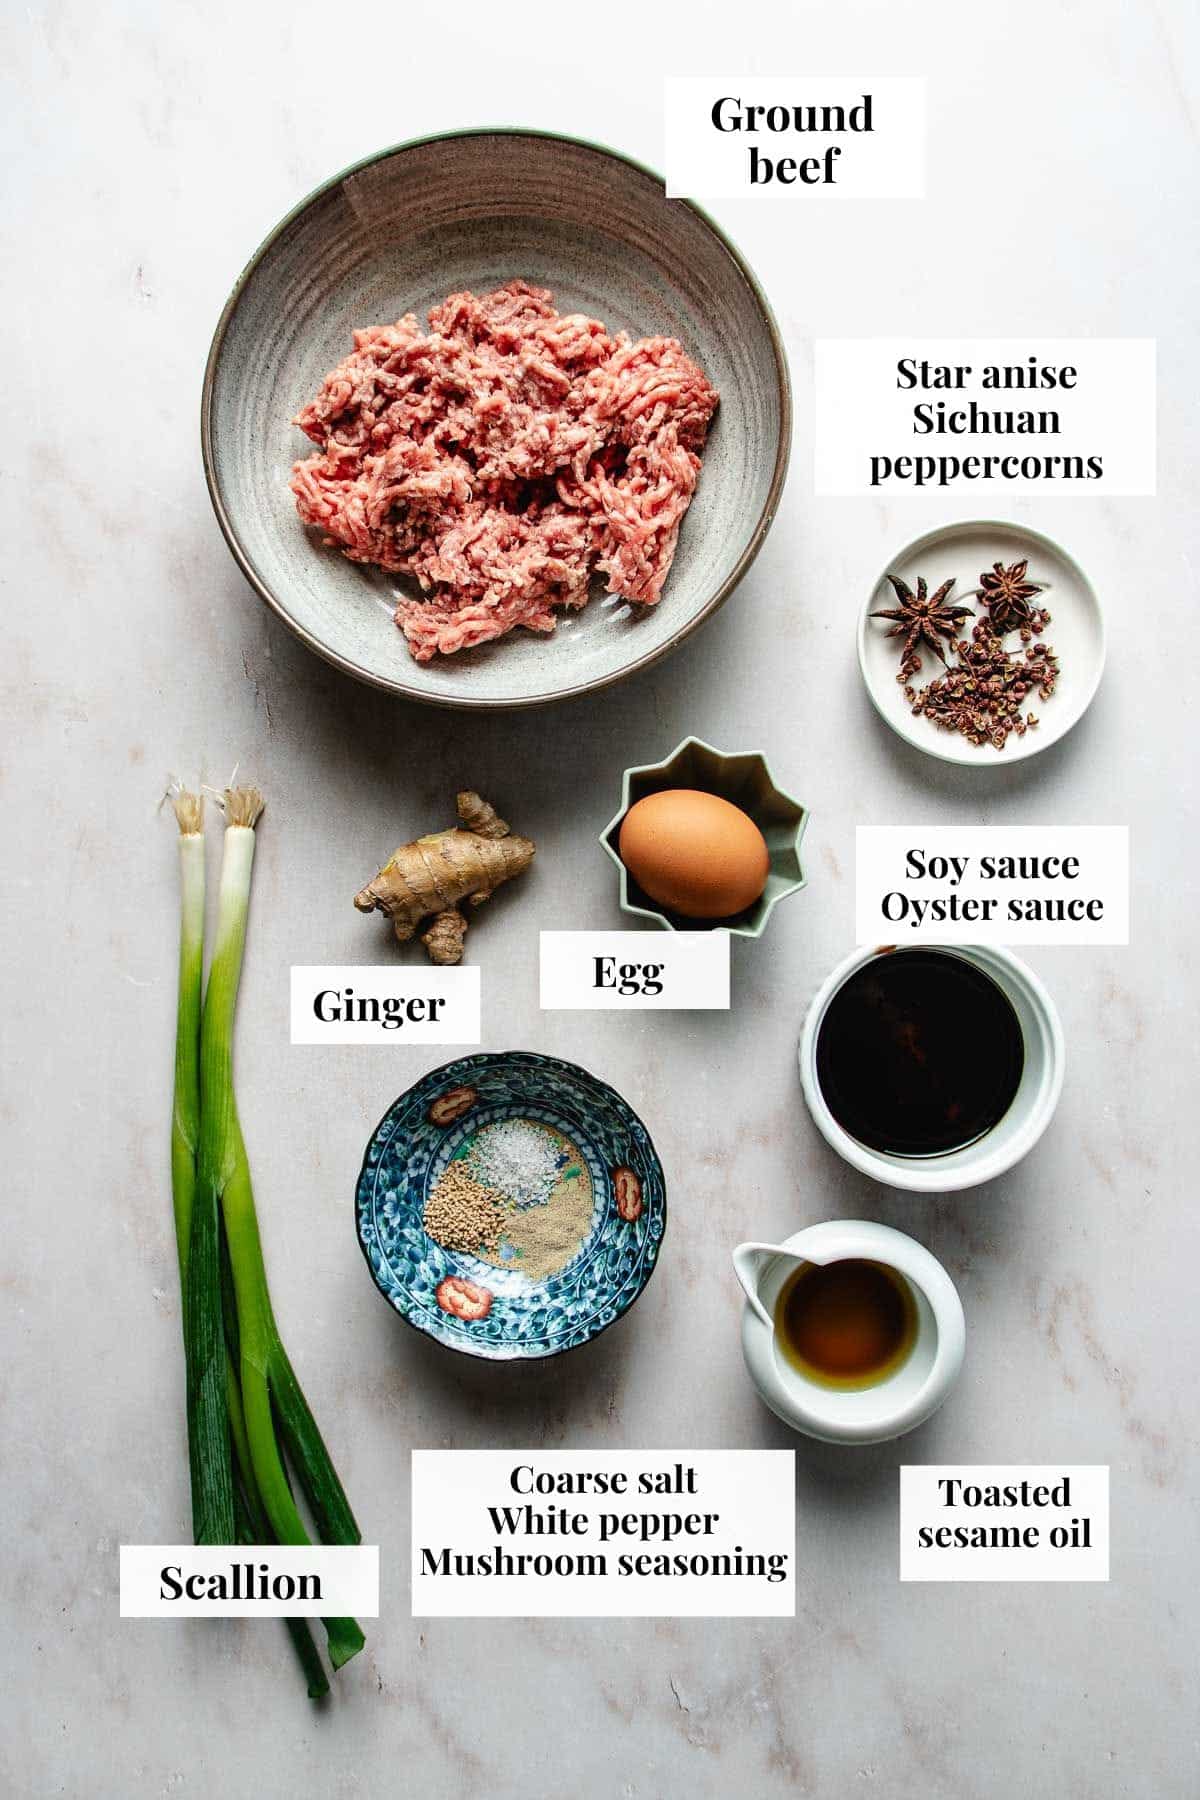 Photo shows ingredients used to make authentic Chinese beef wontons.